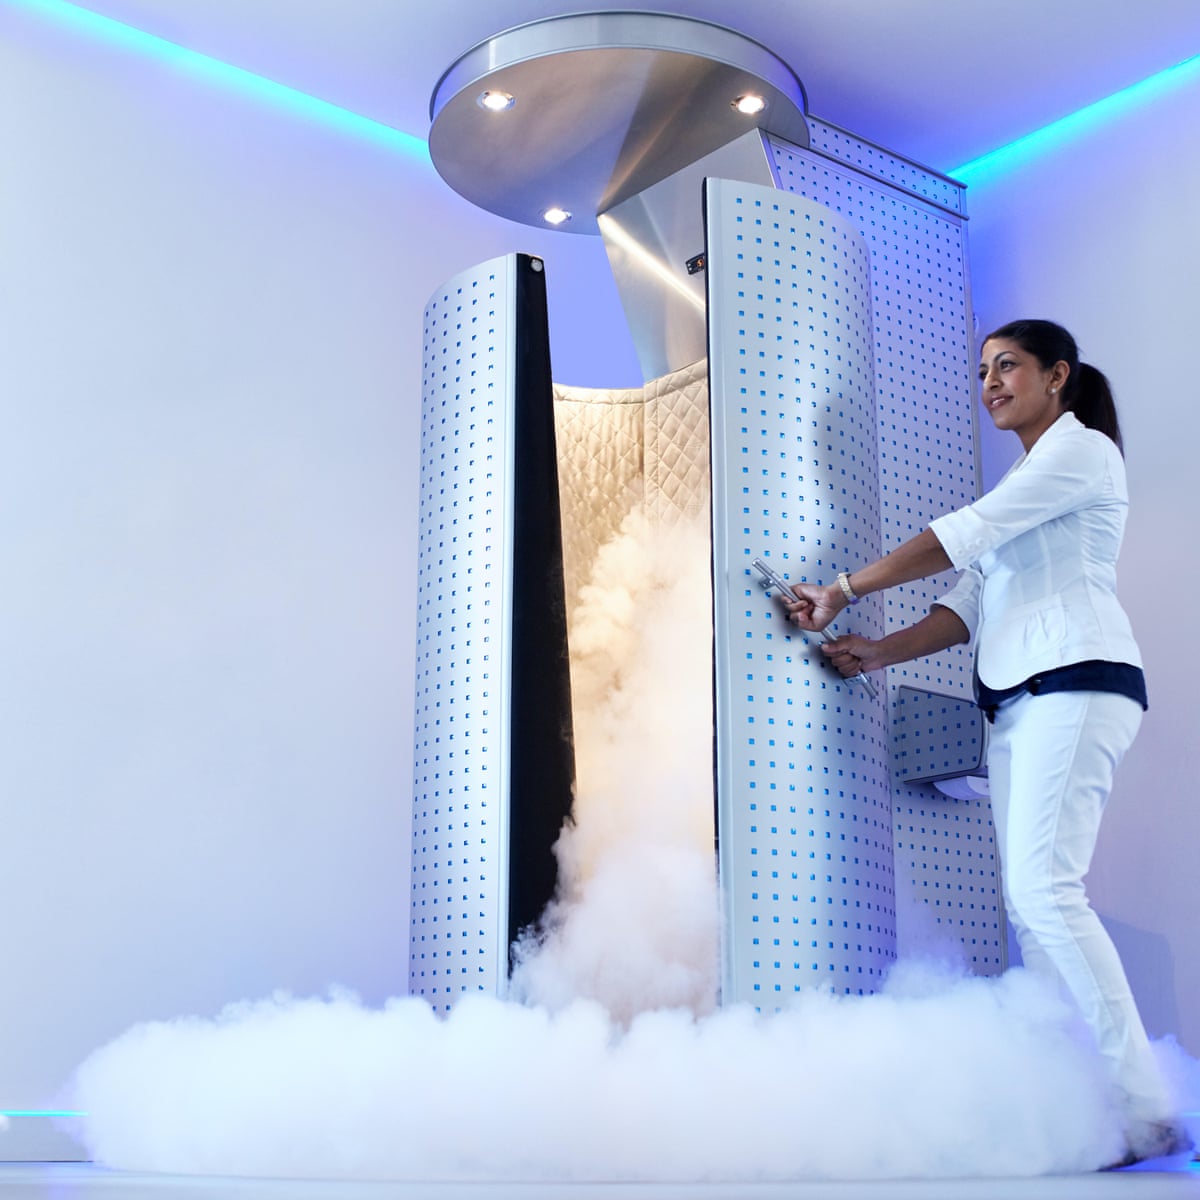 Whole-body cryotherapy: what are the cold hard facts? | Health & wellbeing  | The Guardian